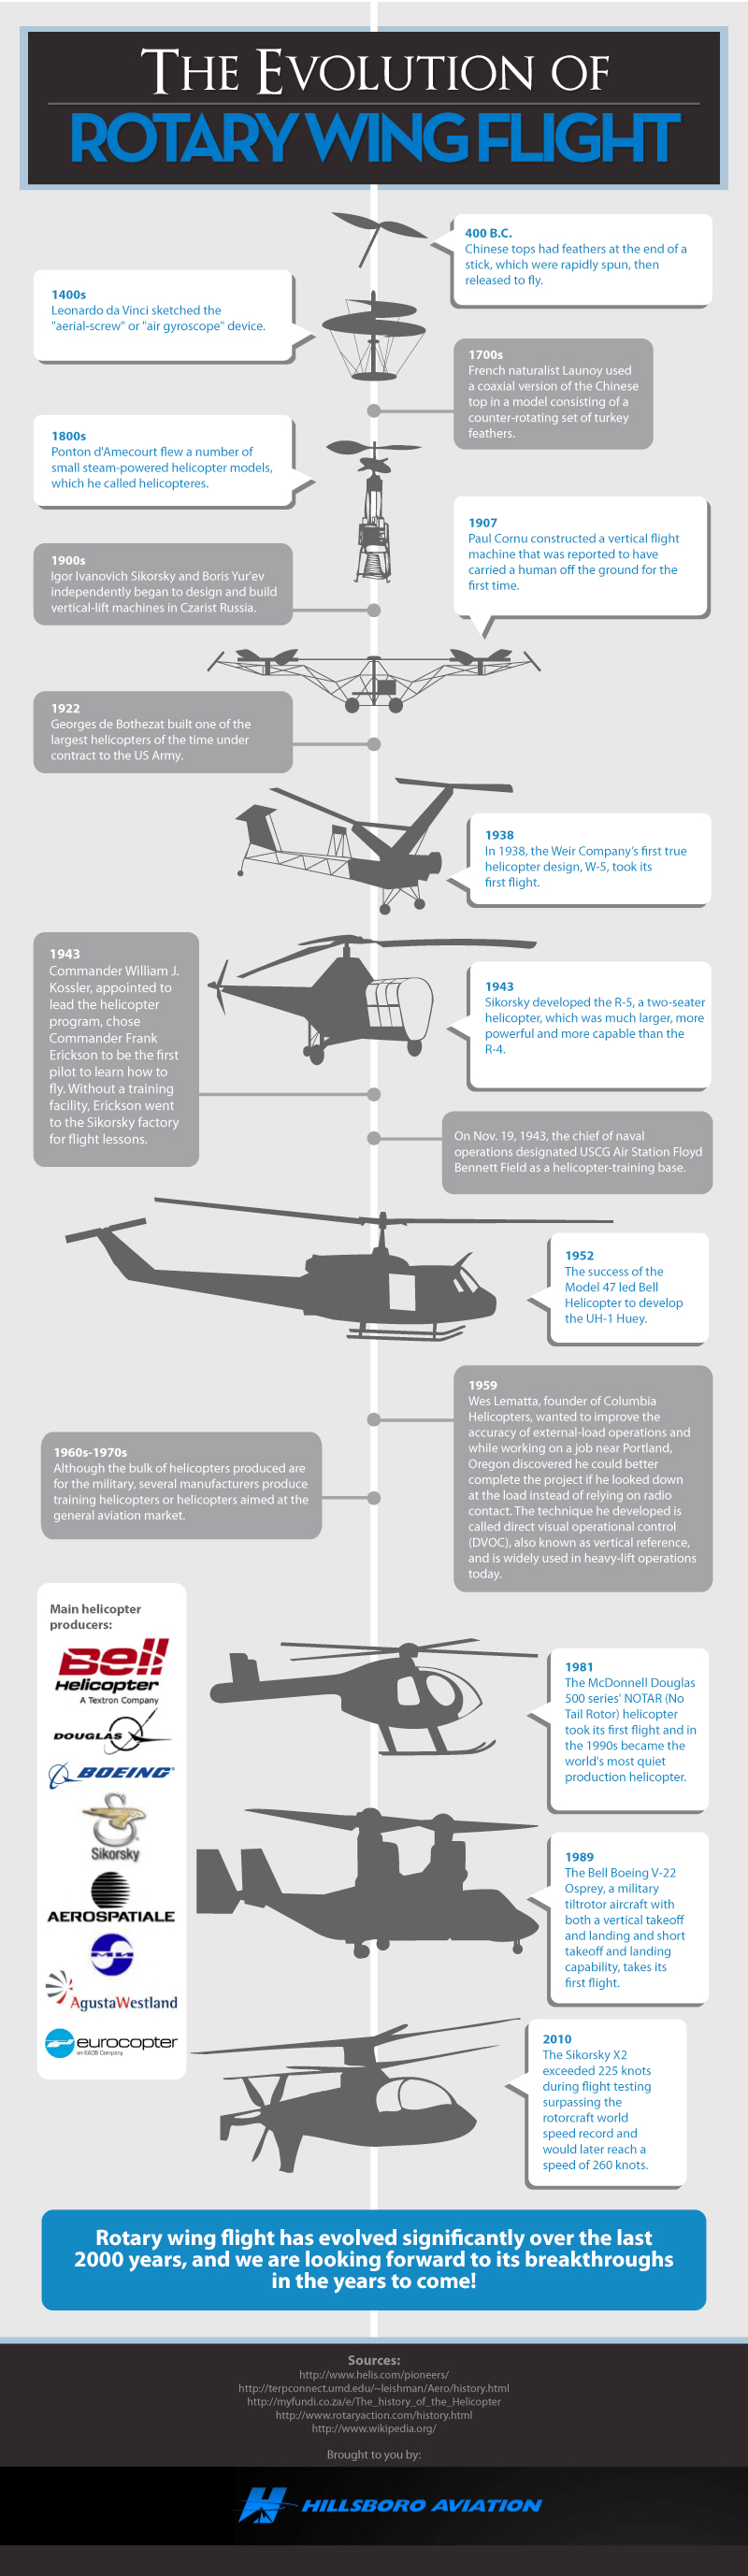 The Evolution of Rotary Wing Flight